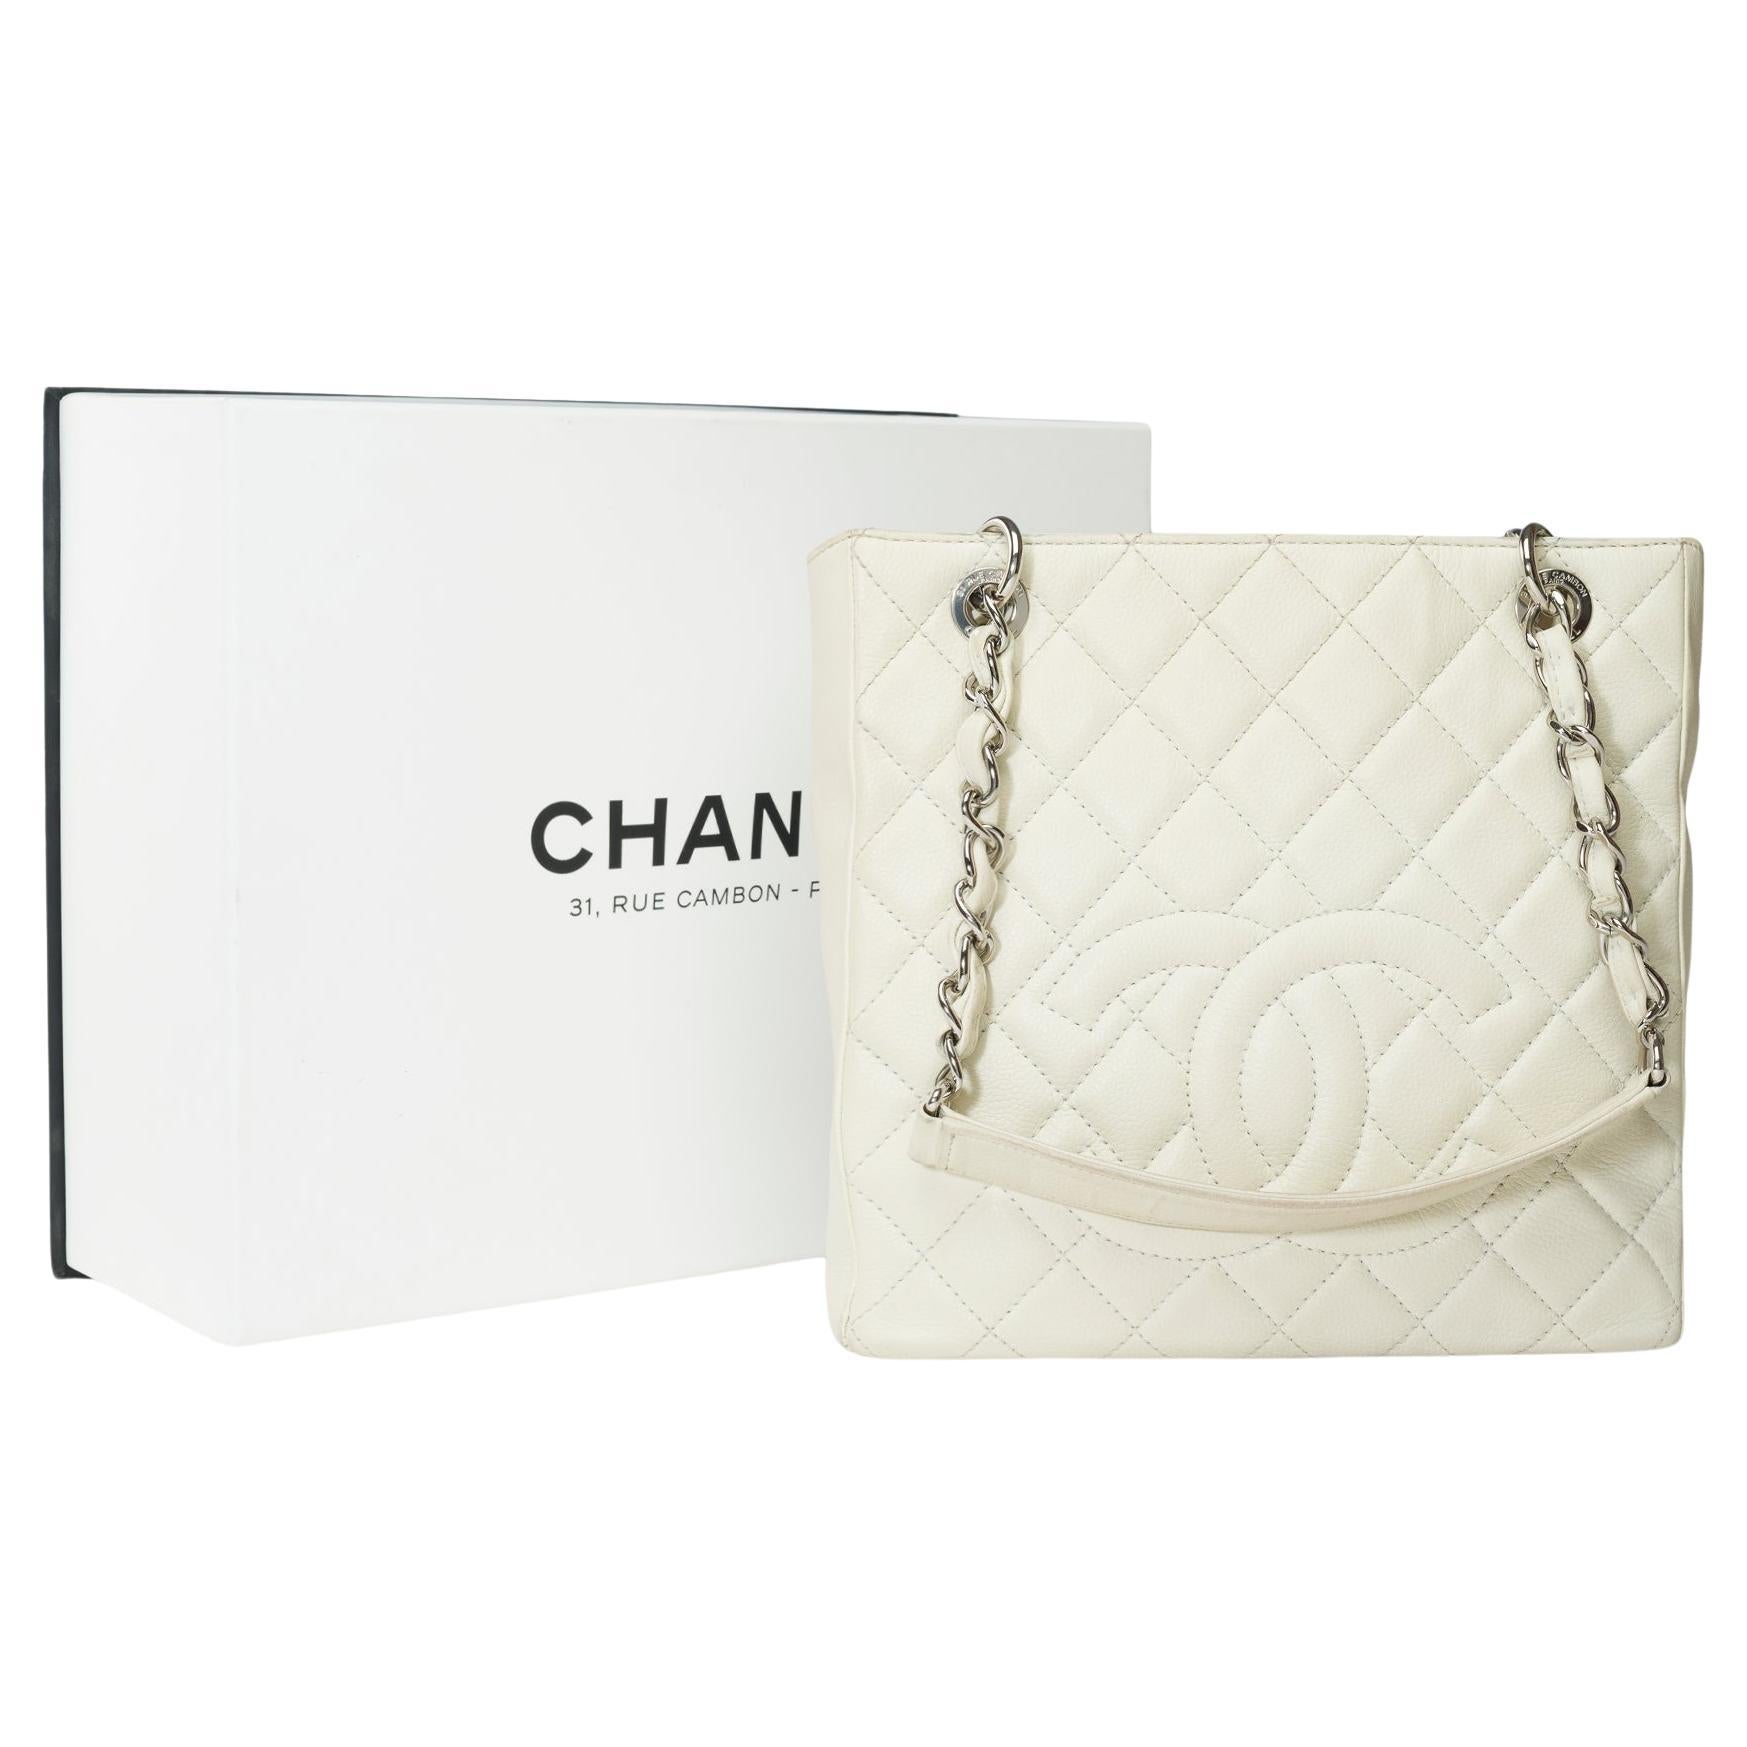  Chanel Petit Shopping Tote bag (PST) in Off-White Caviar quilted leather, SHW For Sale